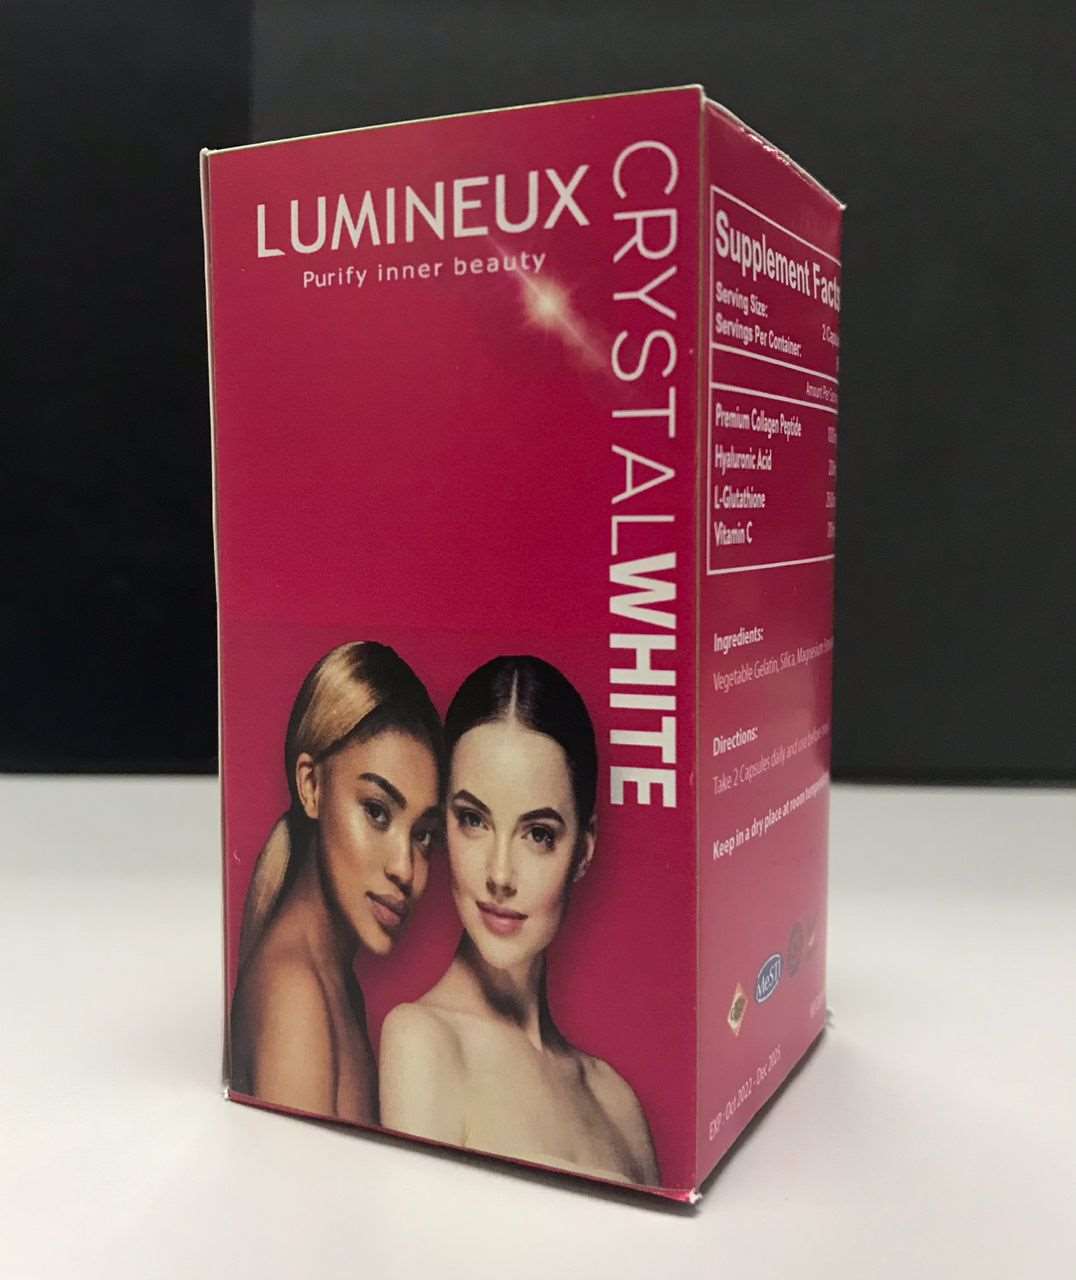 LUMINEUX CRYSTAL WHITE - Purity inner beauty